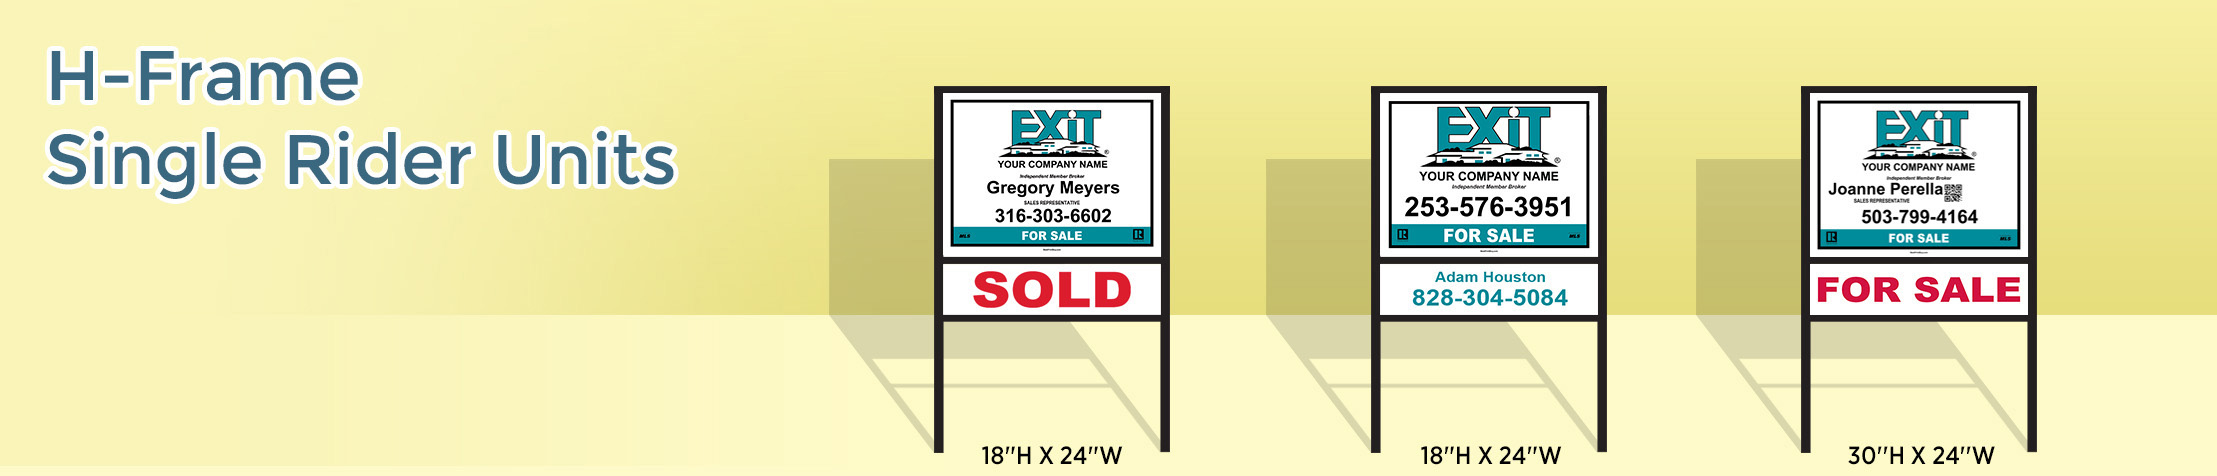 Exit Realty H-Frame Single Rider Units - Exit Realty approved vendor real estate signs | BestPrintBuy.com